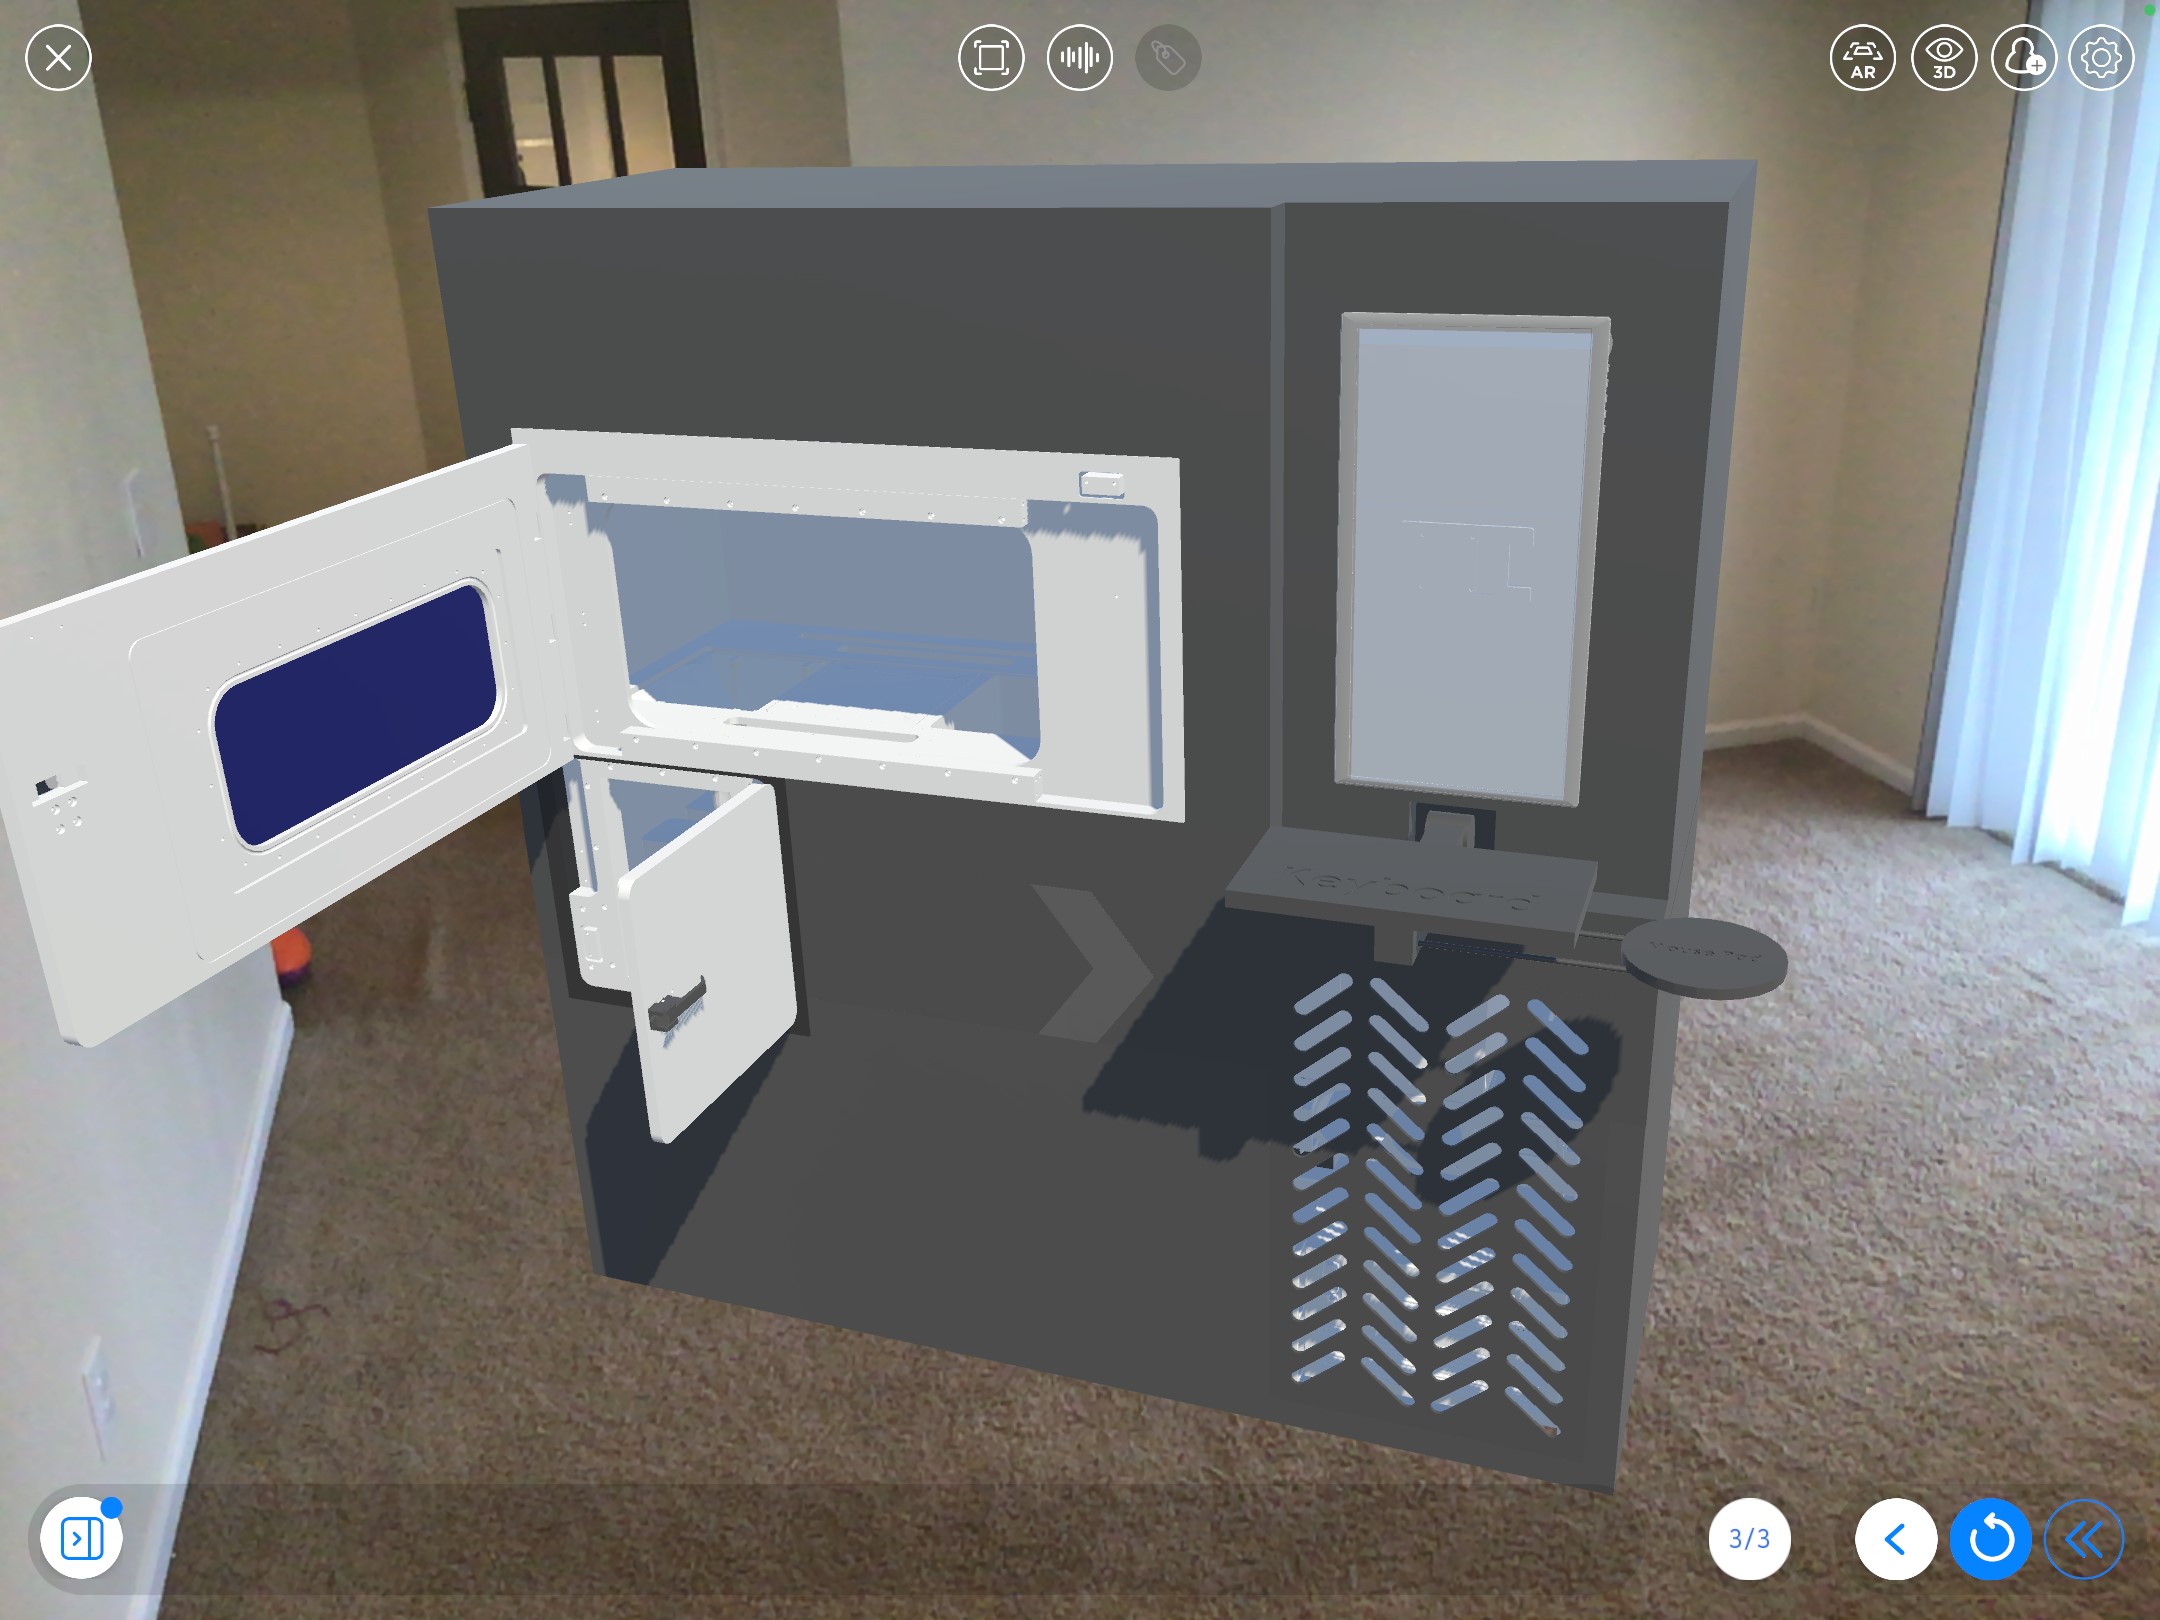 Augmented reality view of a 3D model of a printer